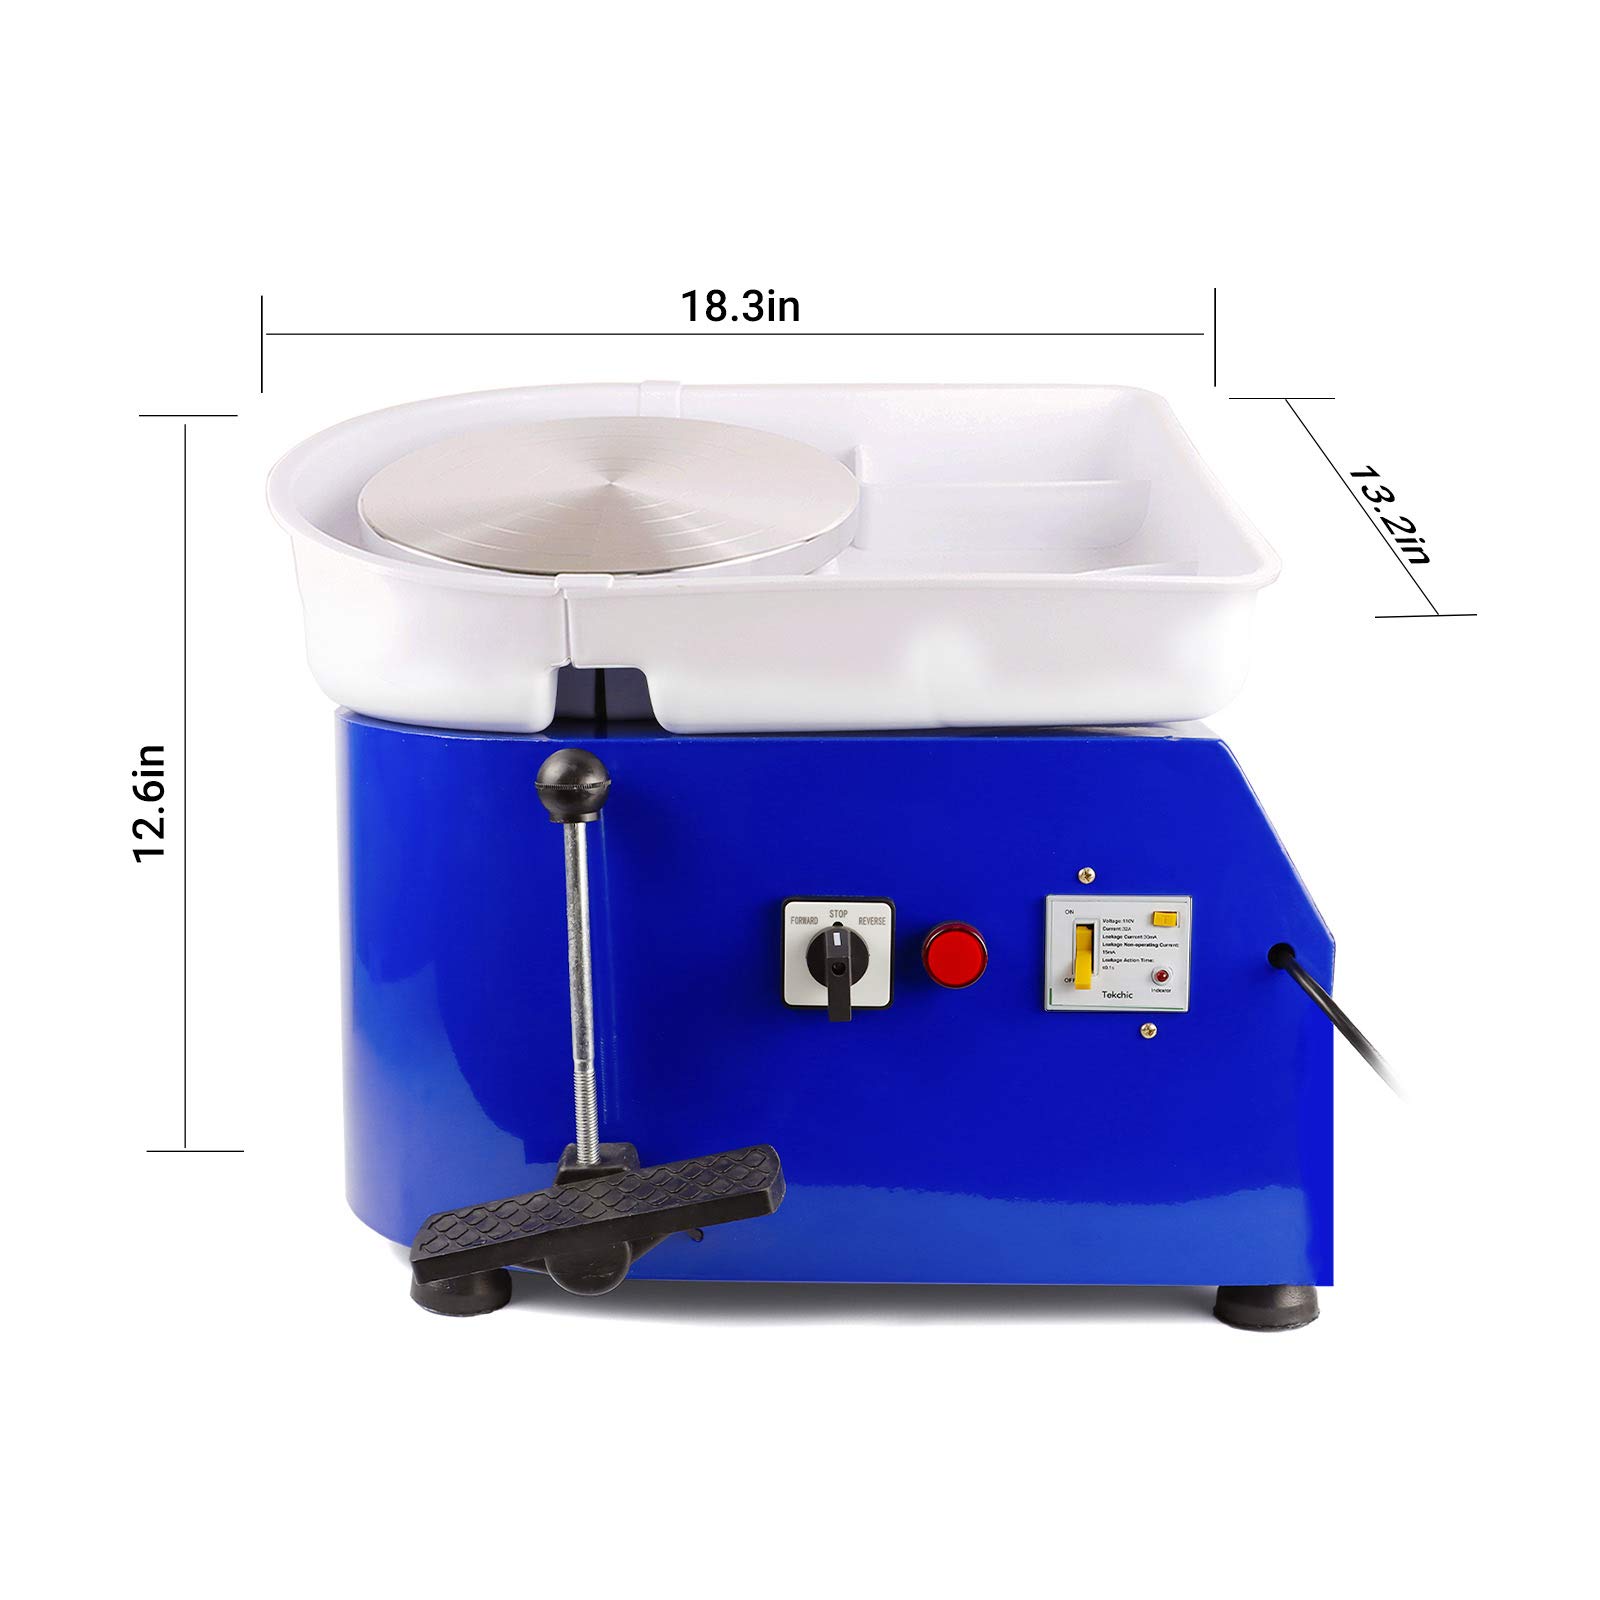 Tekchic Pottery Wheel Machine 350W Electric Pottery DIY Clay Tool with Foot Pedal - Blue